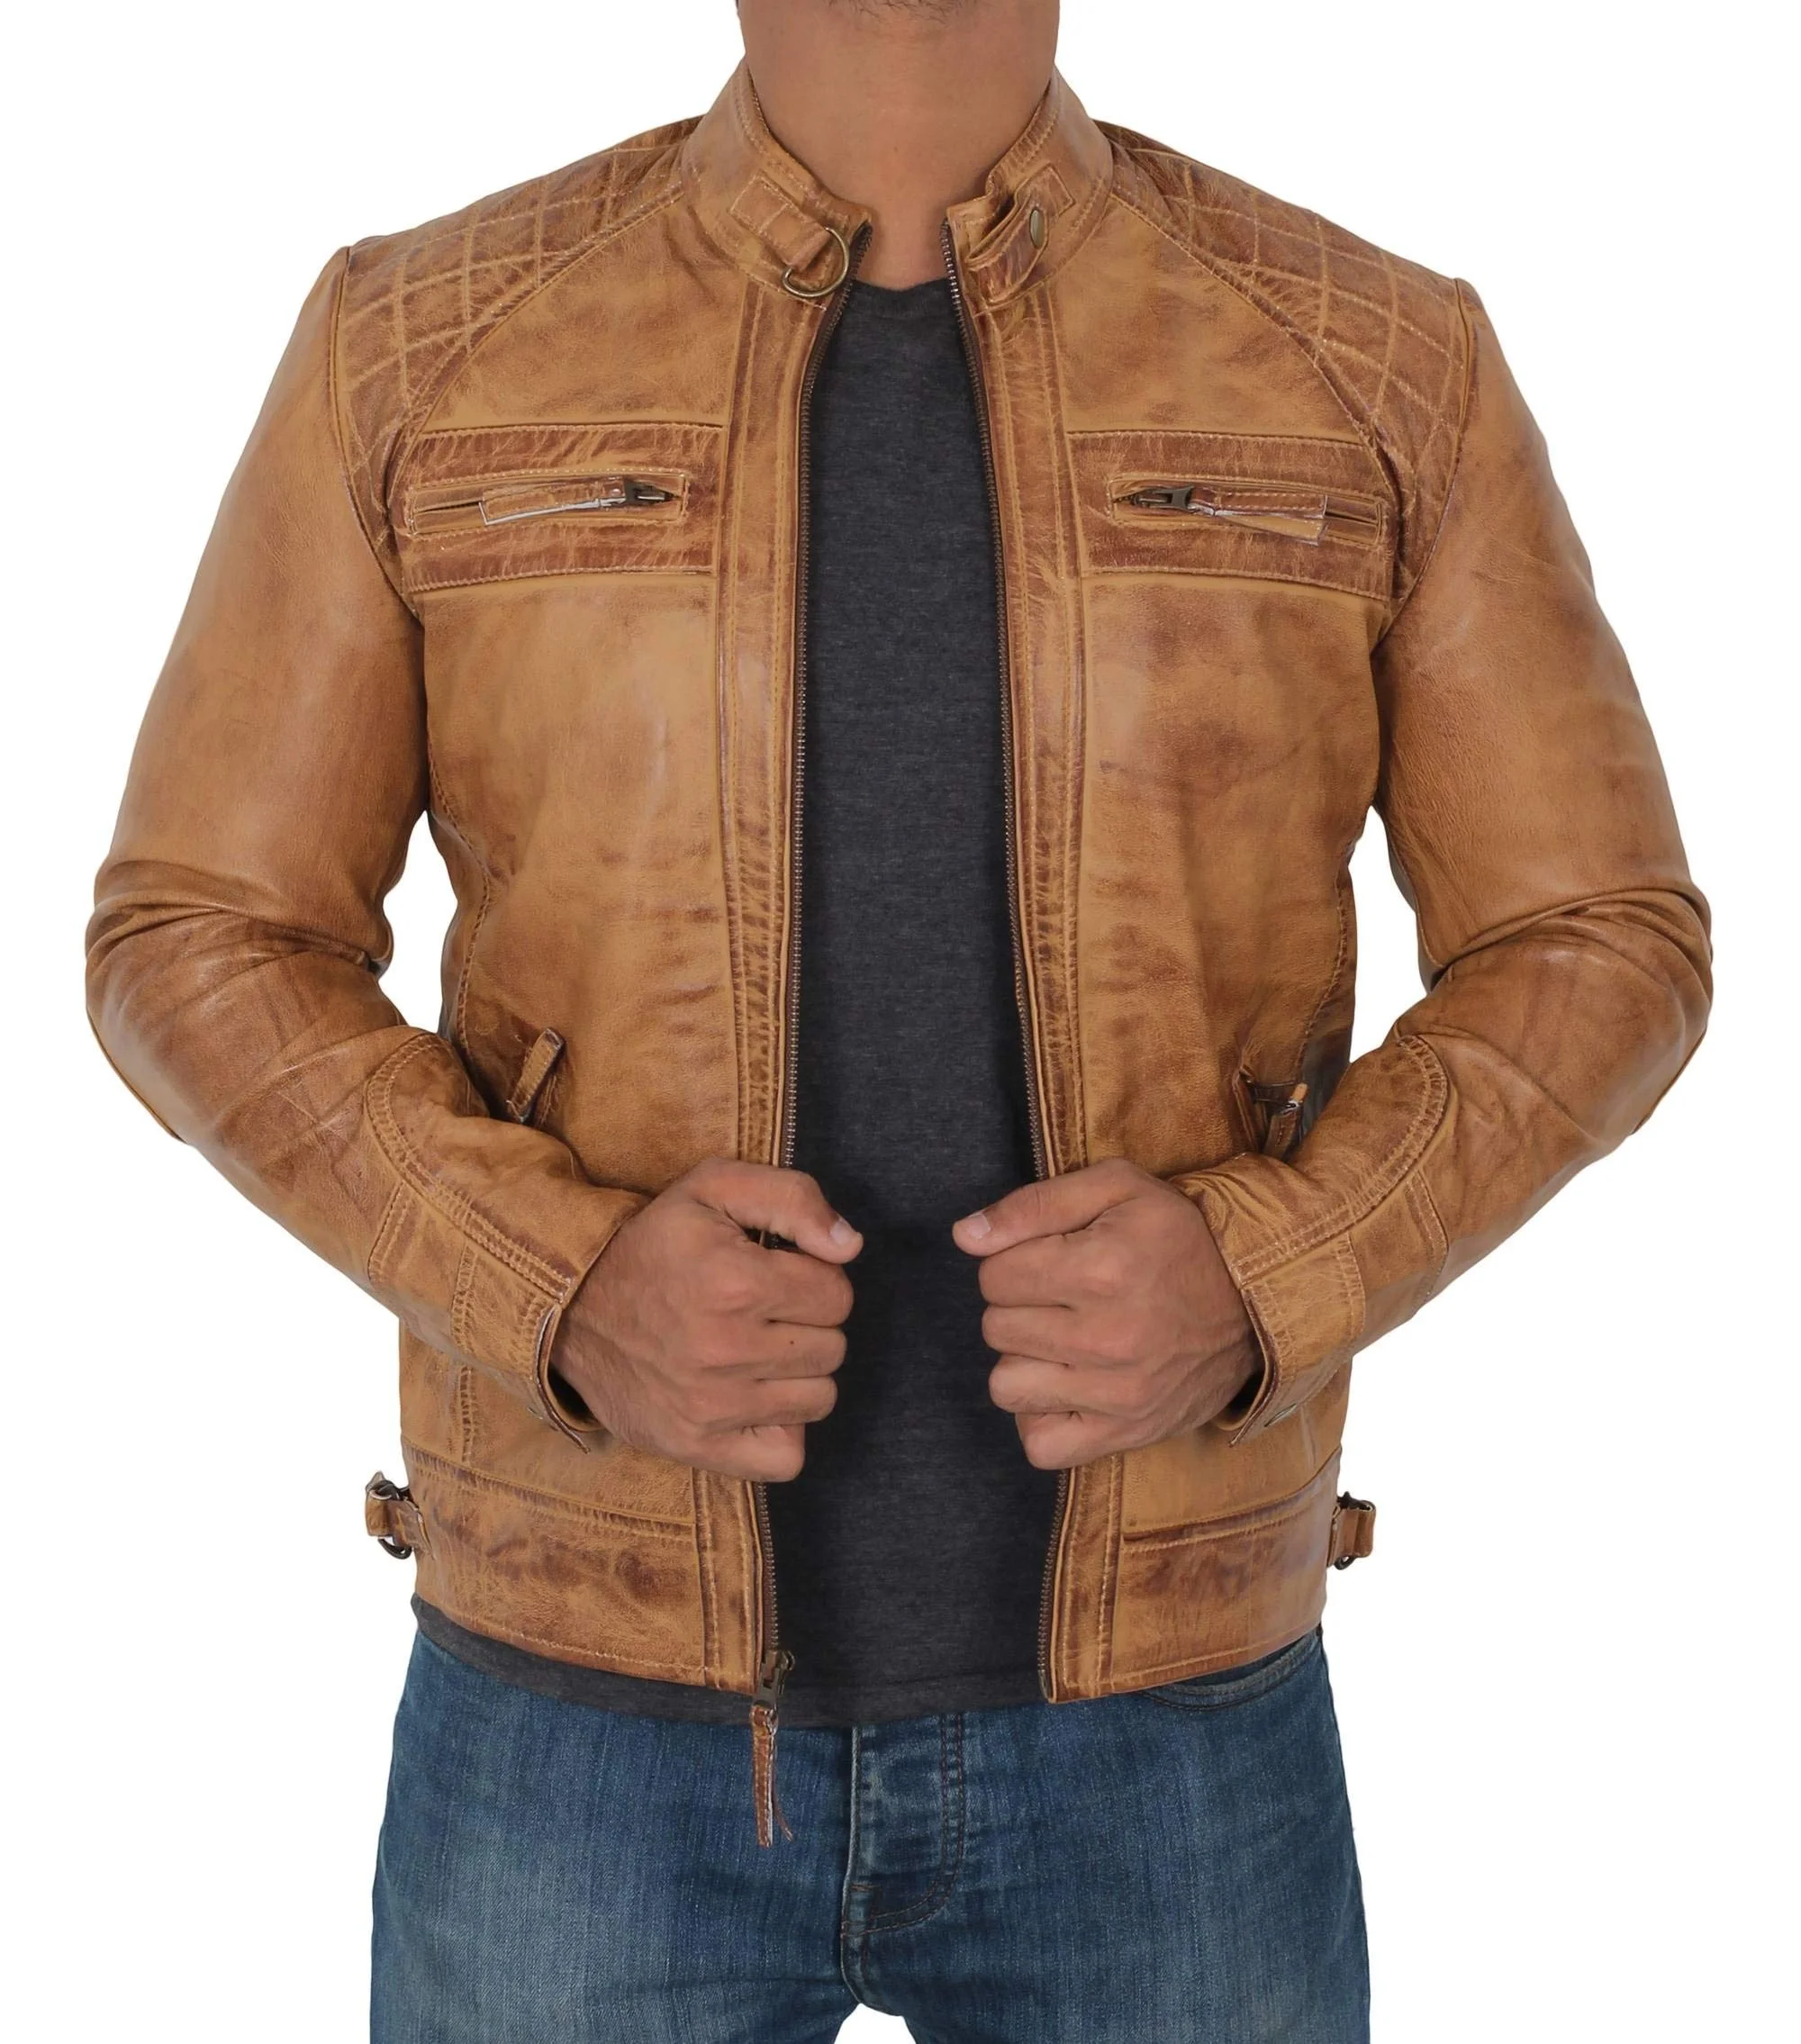 Pakistan Leather Jackets Photos Images Pictures On Alibaba